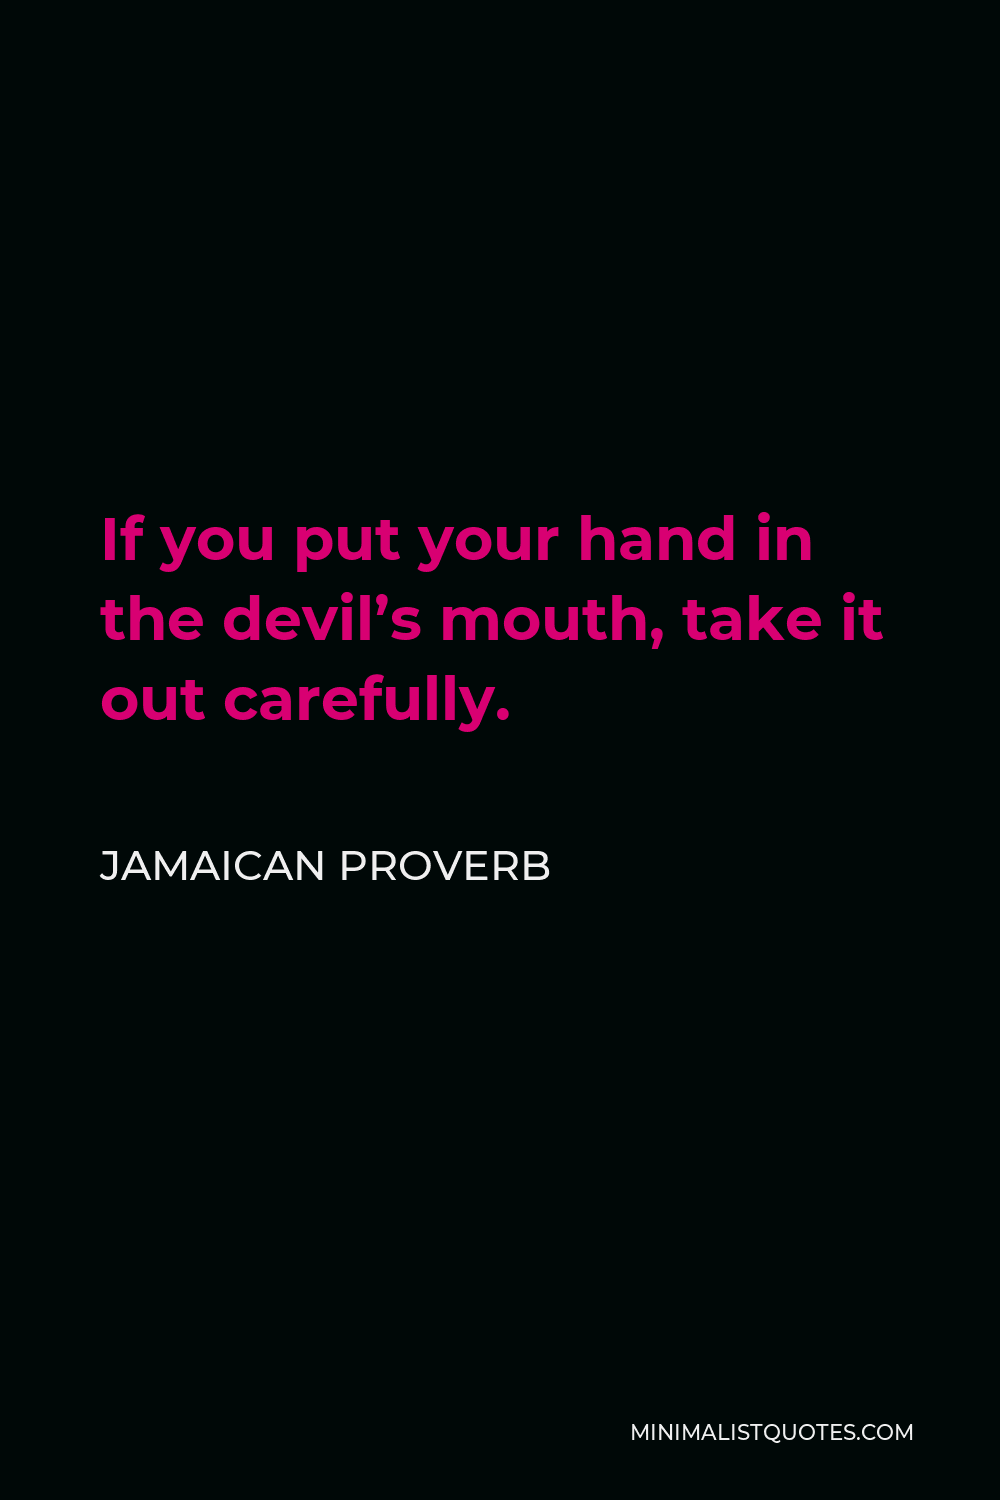 Jamaican Proverb Quote - If you put your hand in the devil’s mouth, take it out carefully.